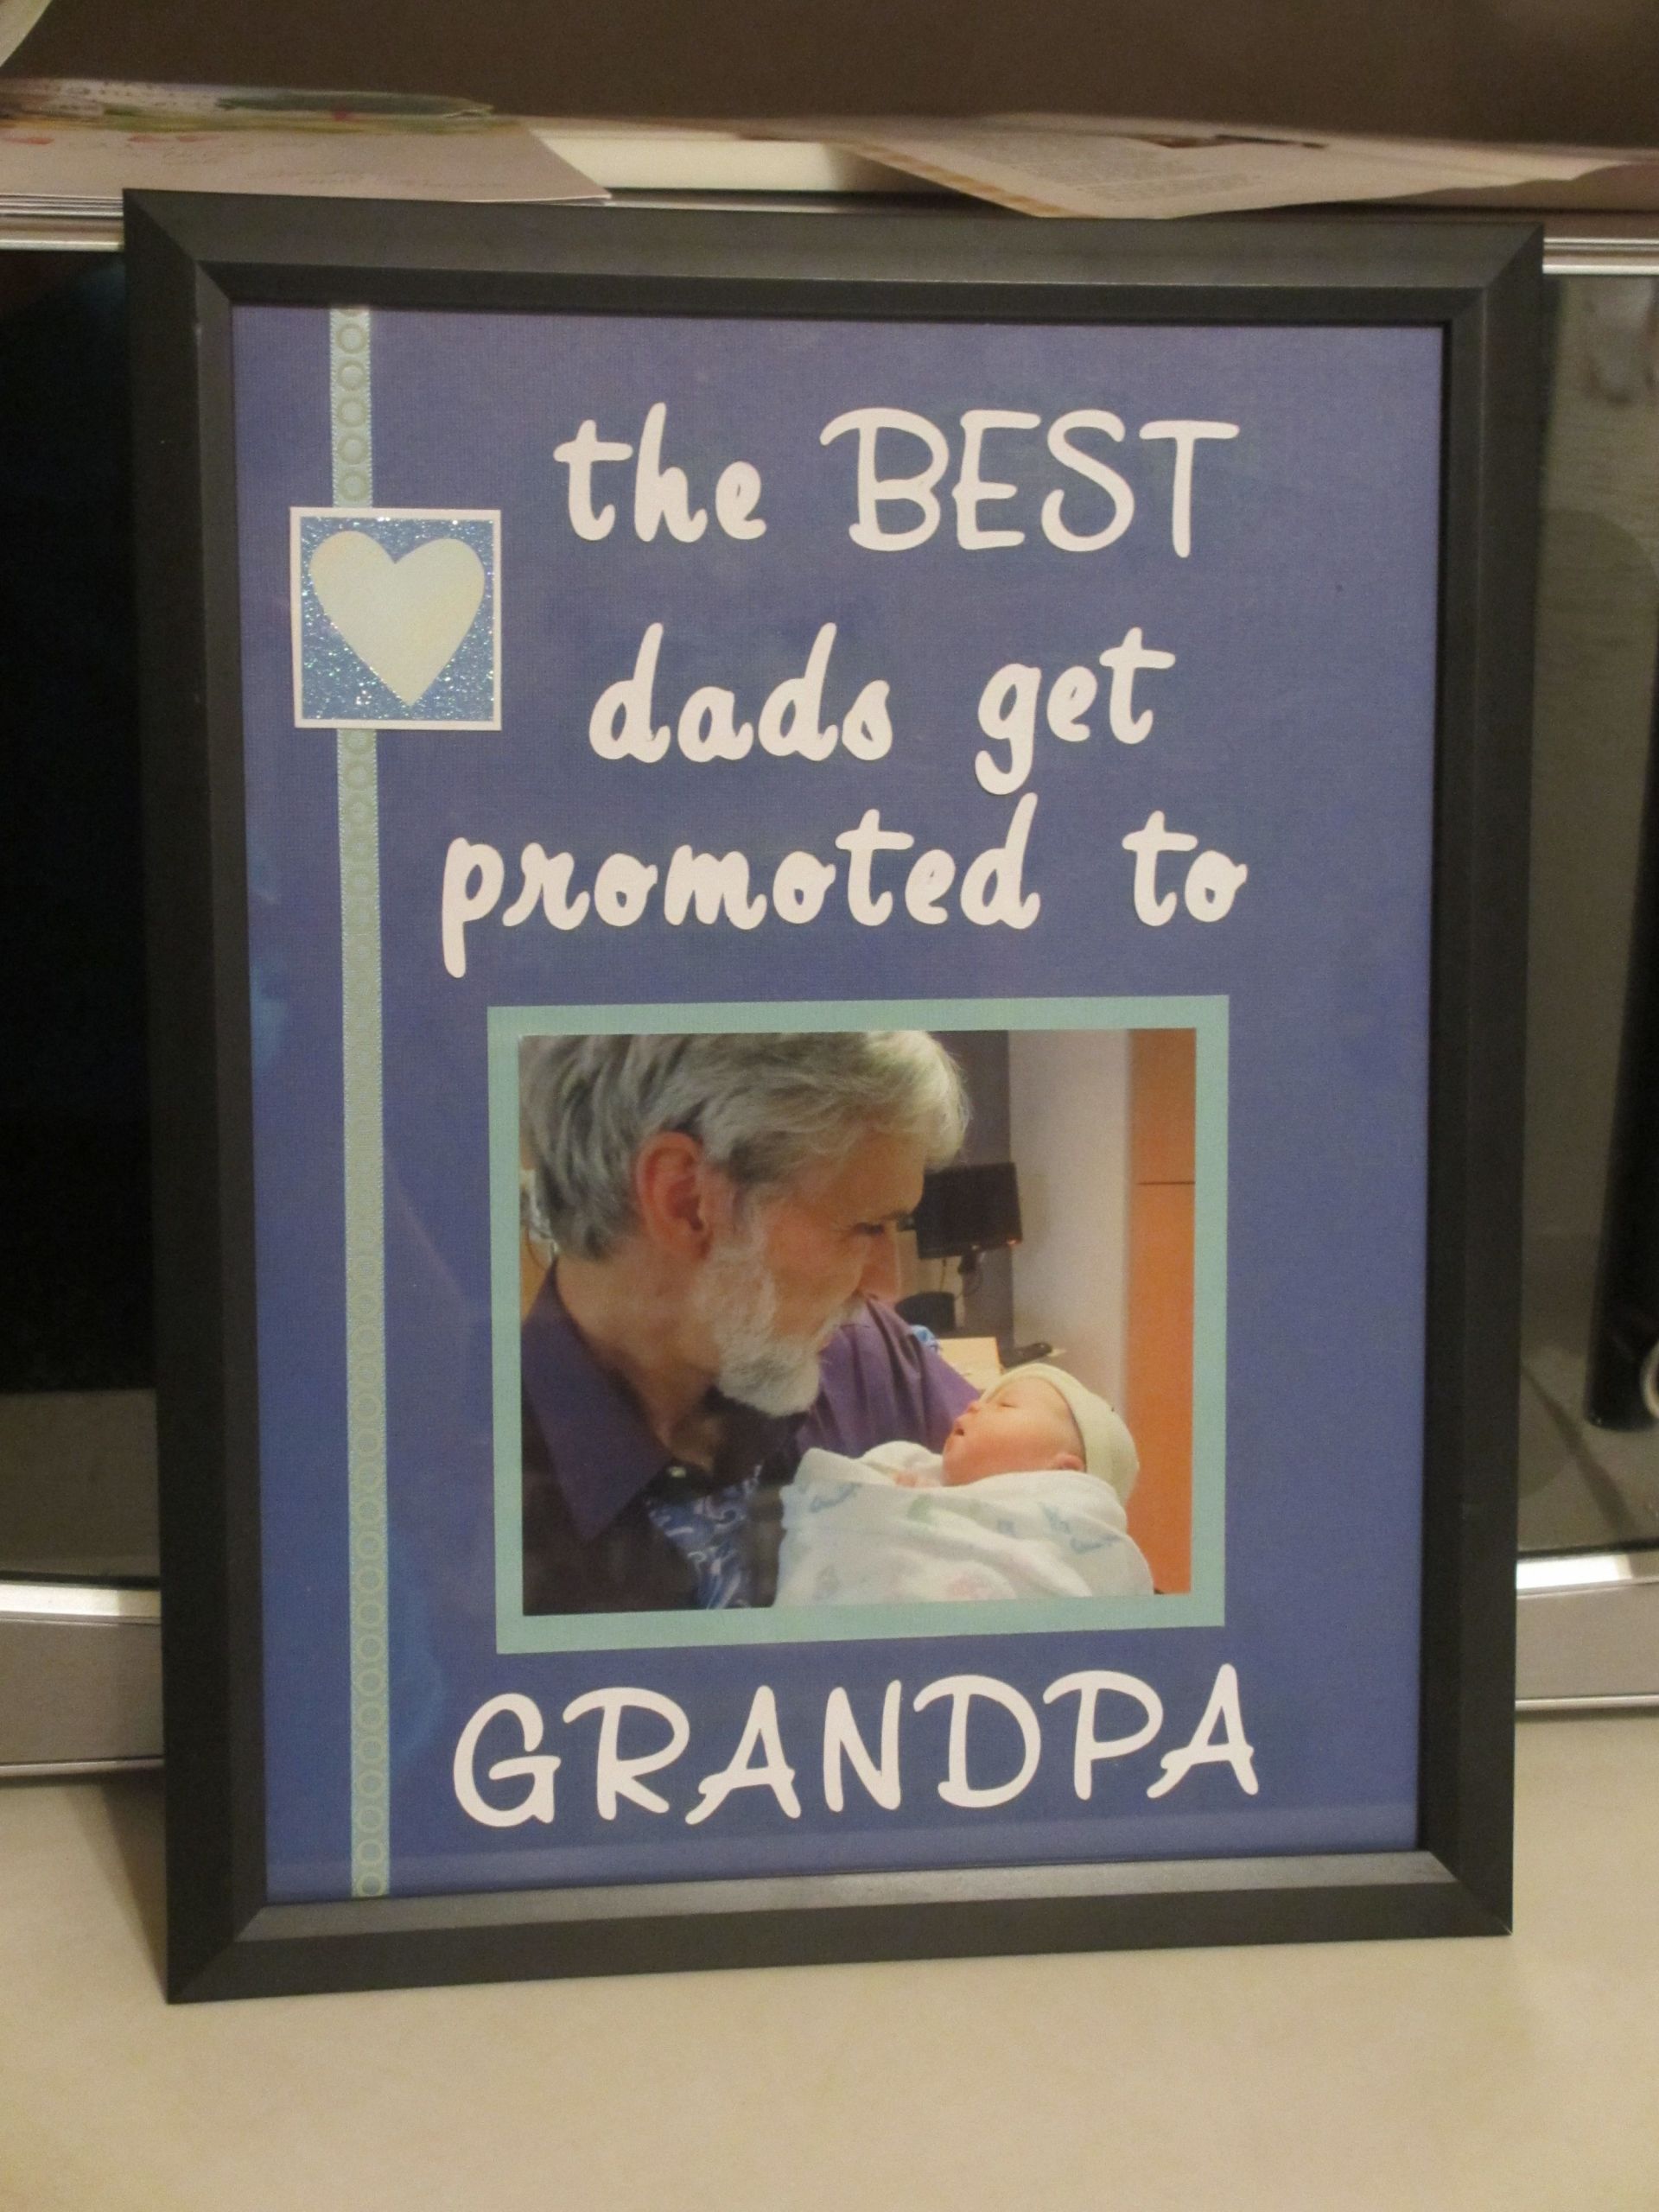 Fathers Day Gifts For Grandpas
 first time grandpa t idea DIY dollar store frame used